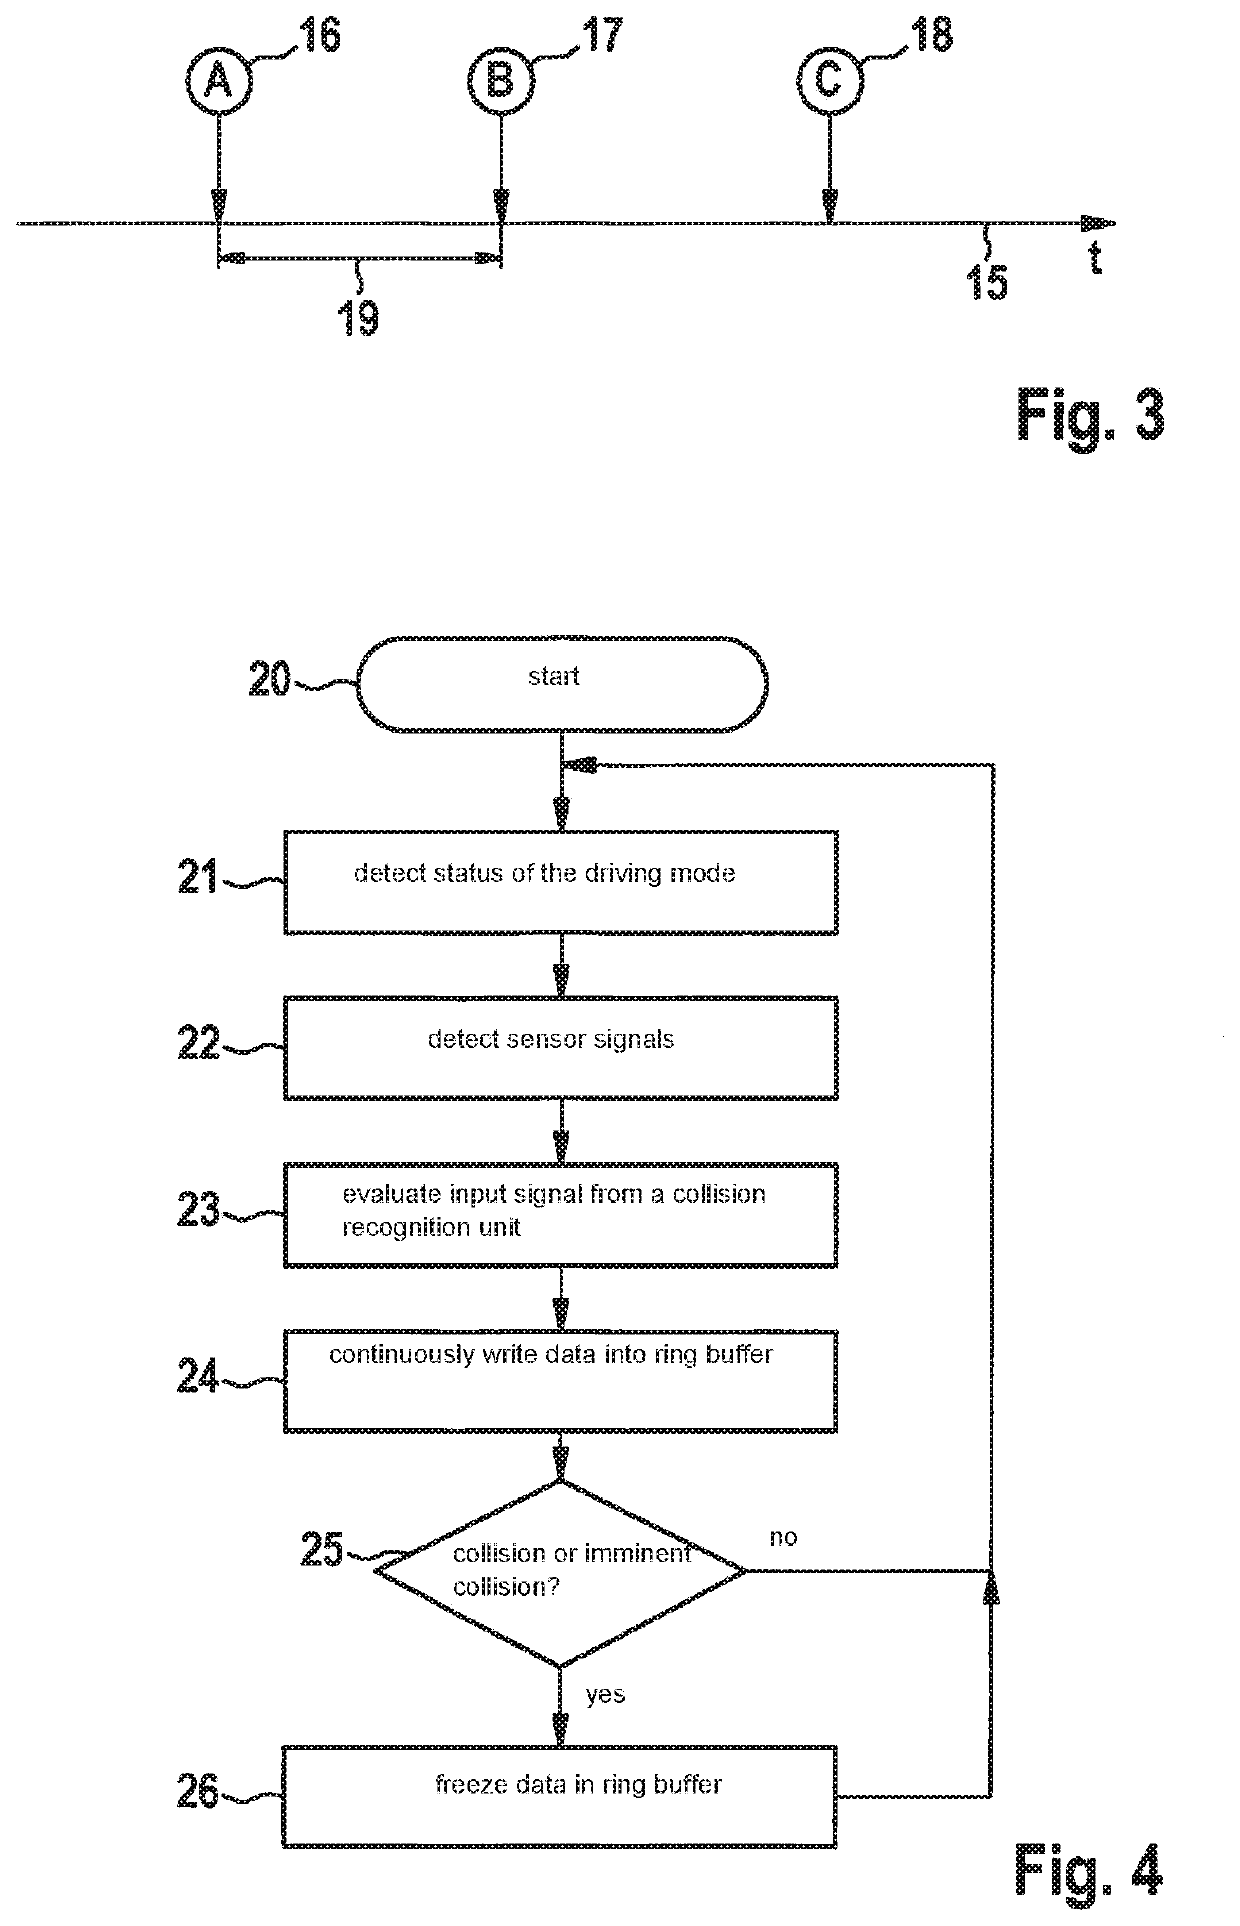 Method and device in a vehicle for evaluating and storing data